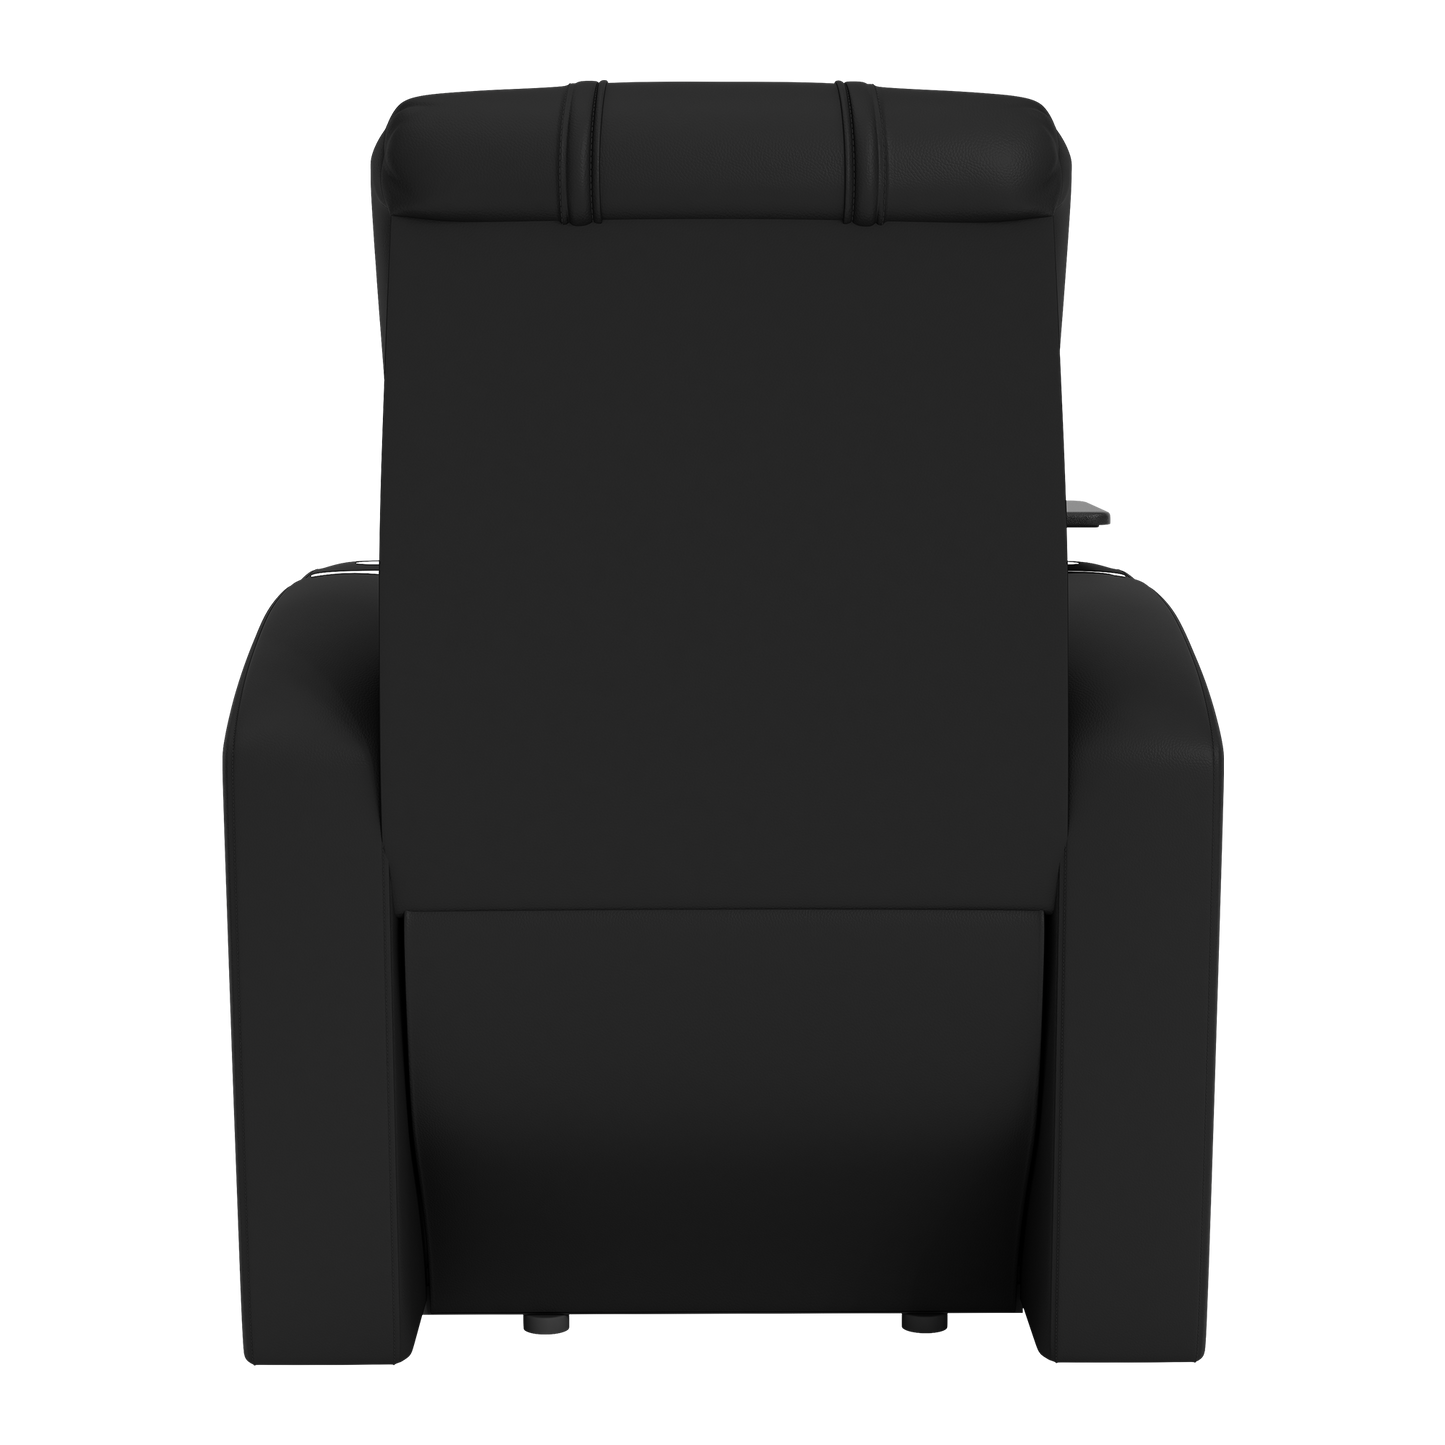 Stealth Power Plus Recliner with Houston Texans Secondary Logo